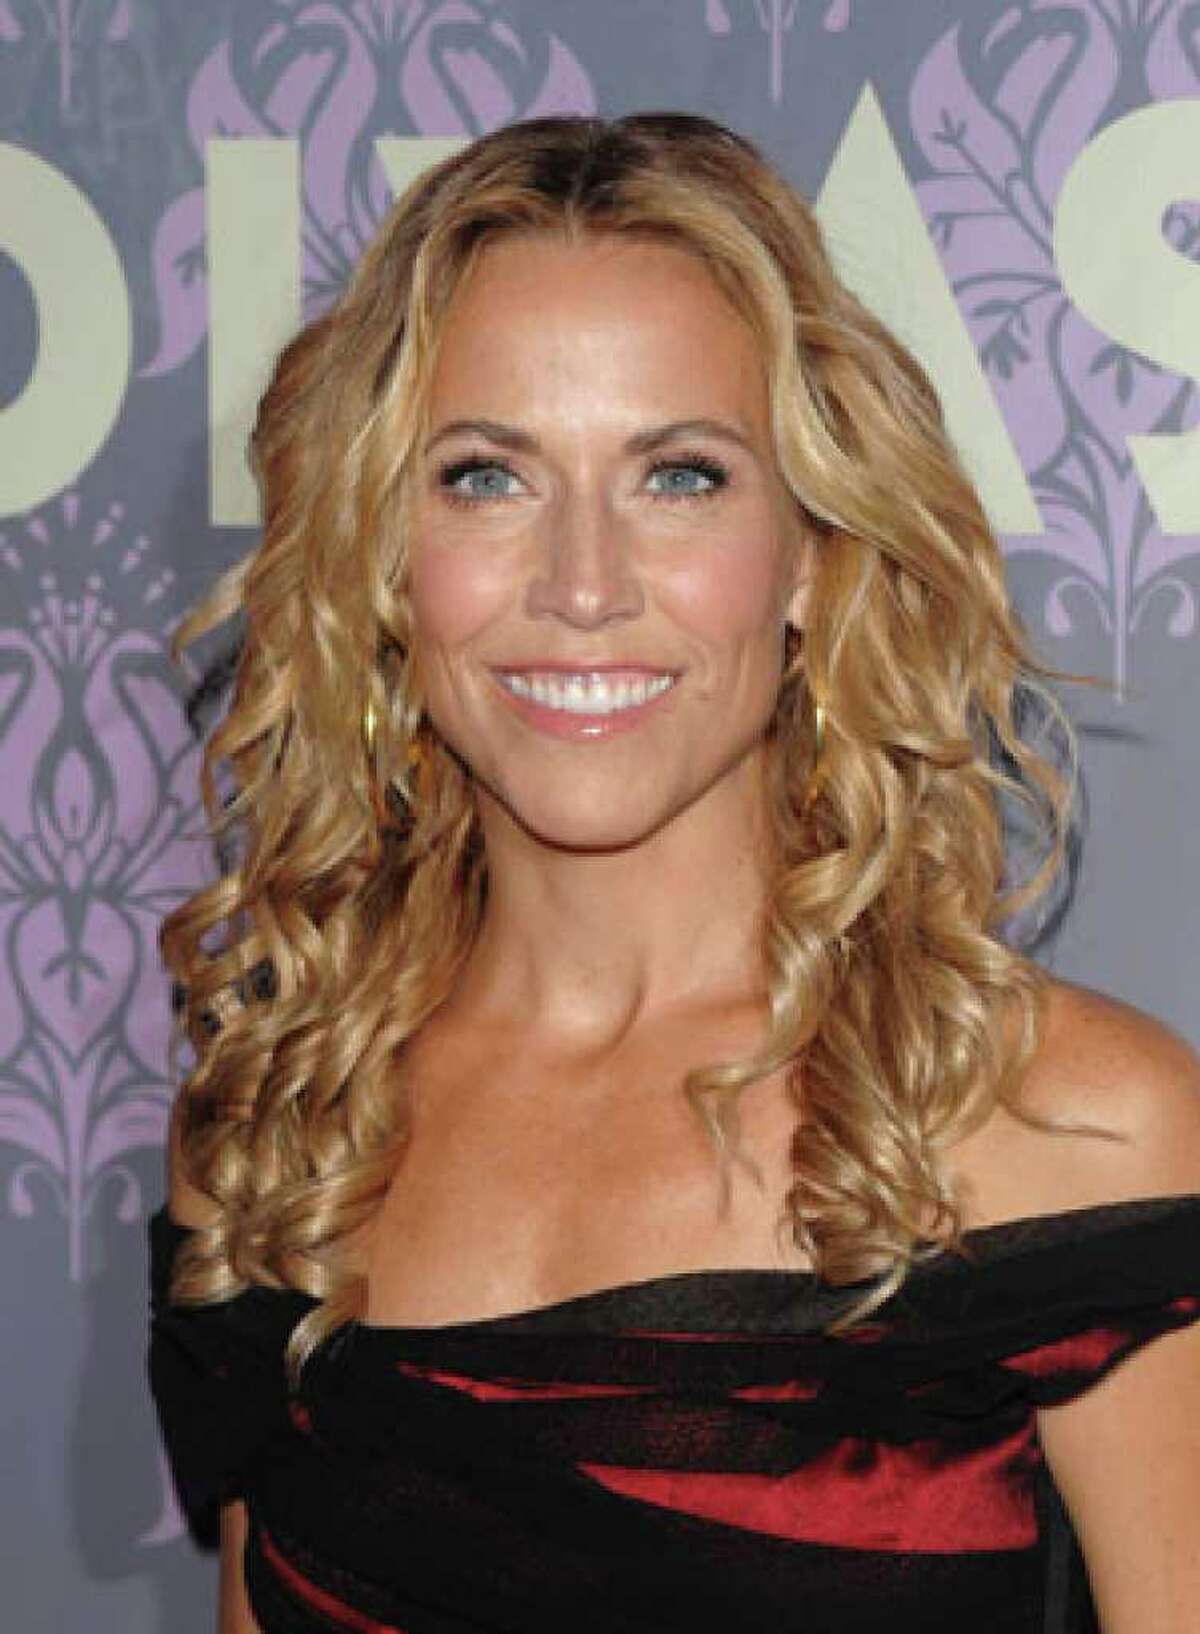 Sheryl Crow is joining others in calling on the federal government to halt wild horse roundups in the West, branding them as inhumane and unnecessary.